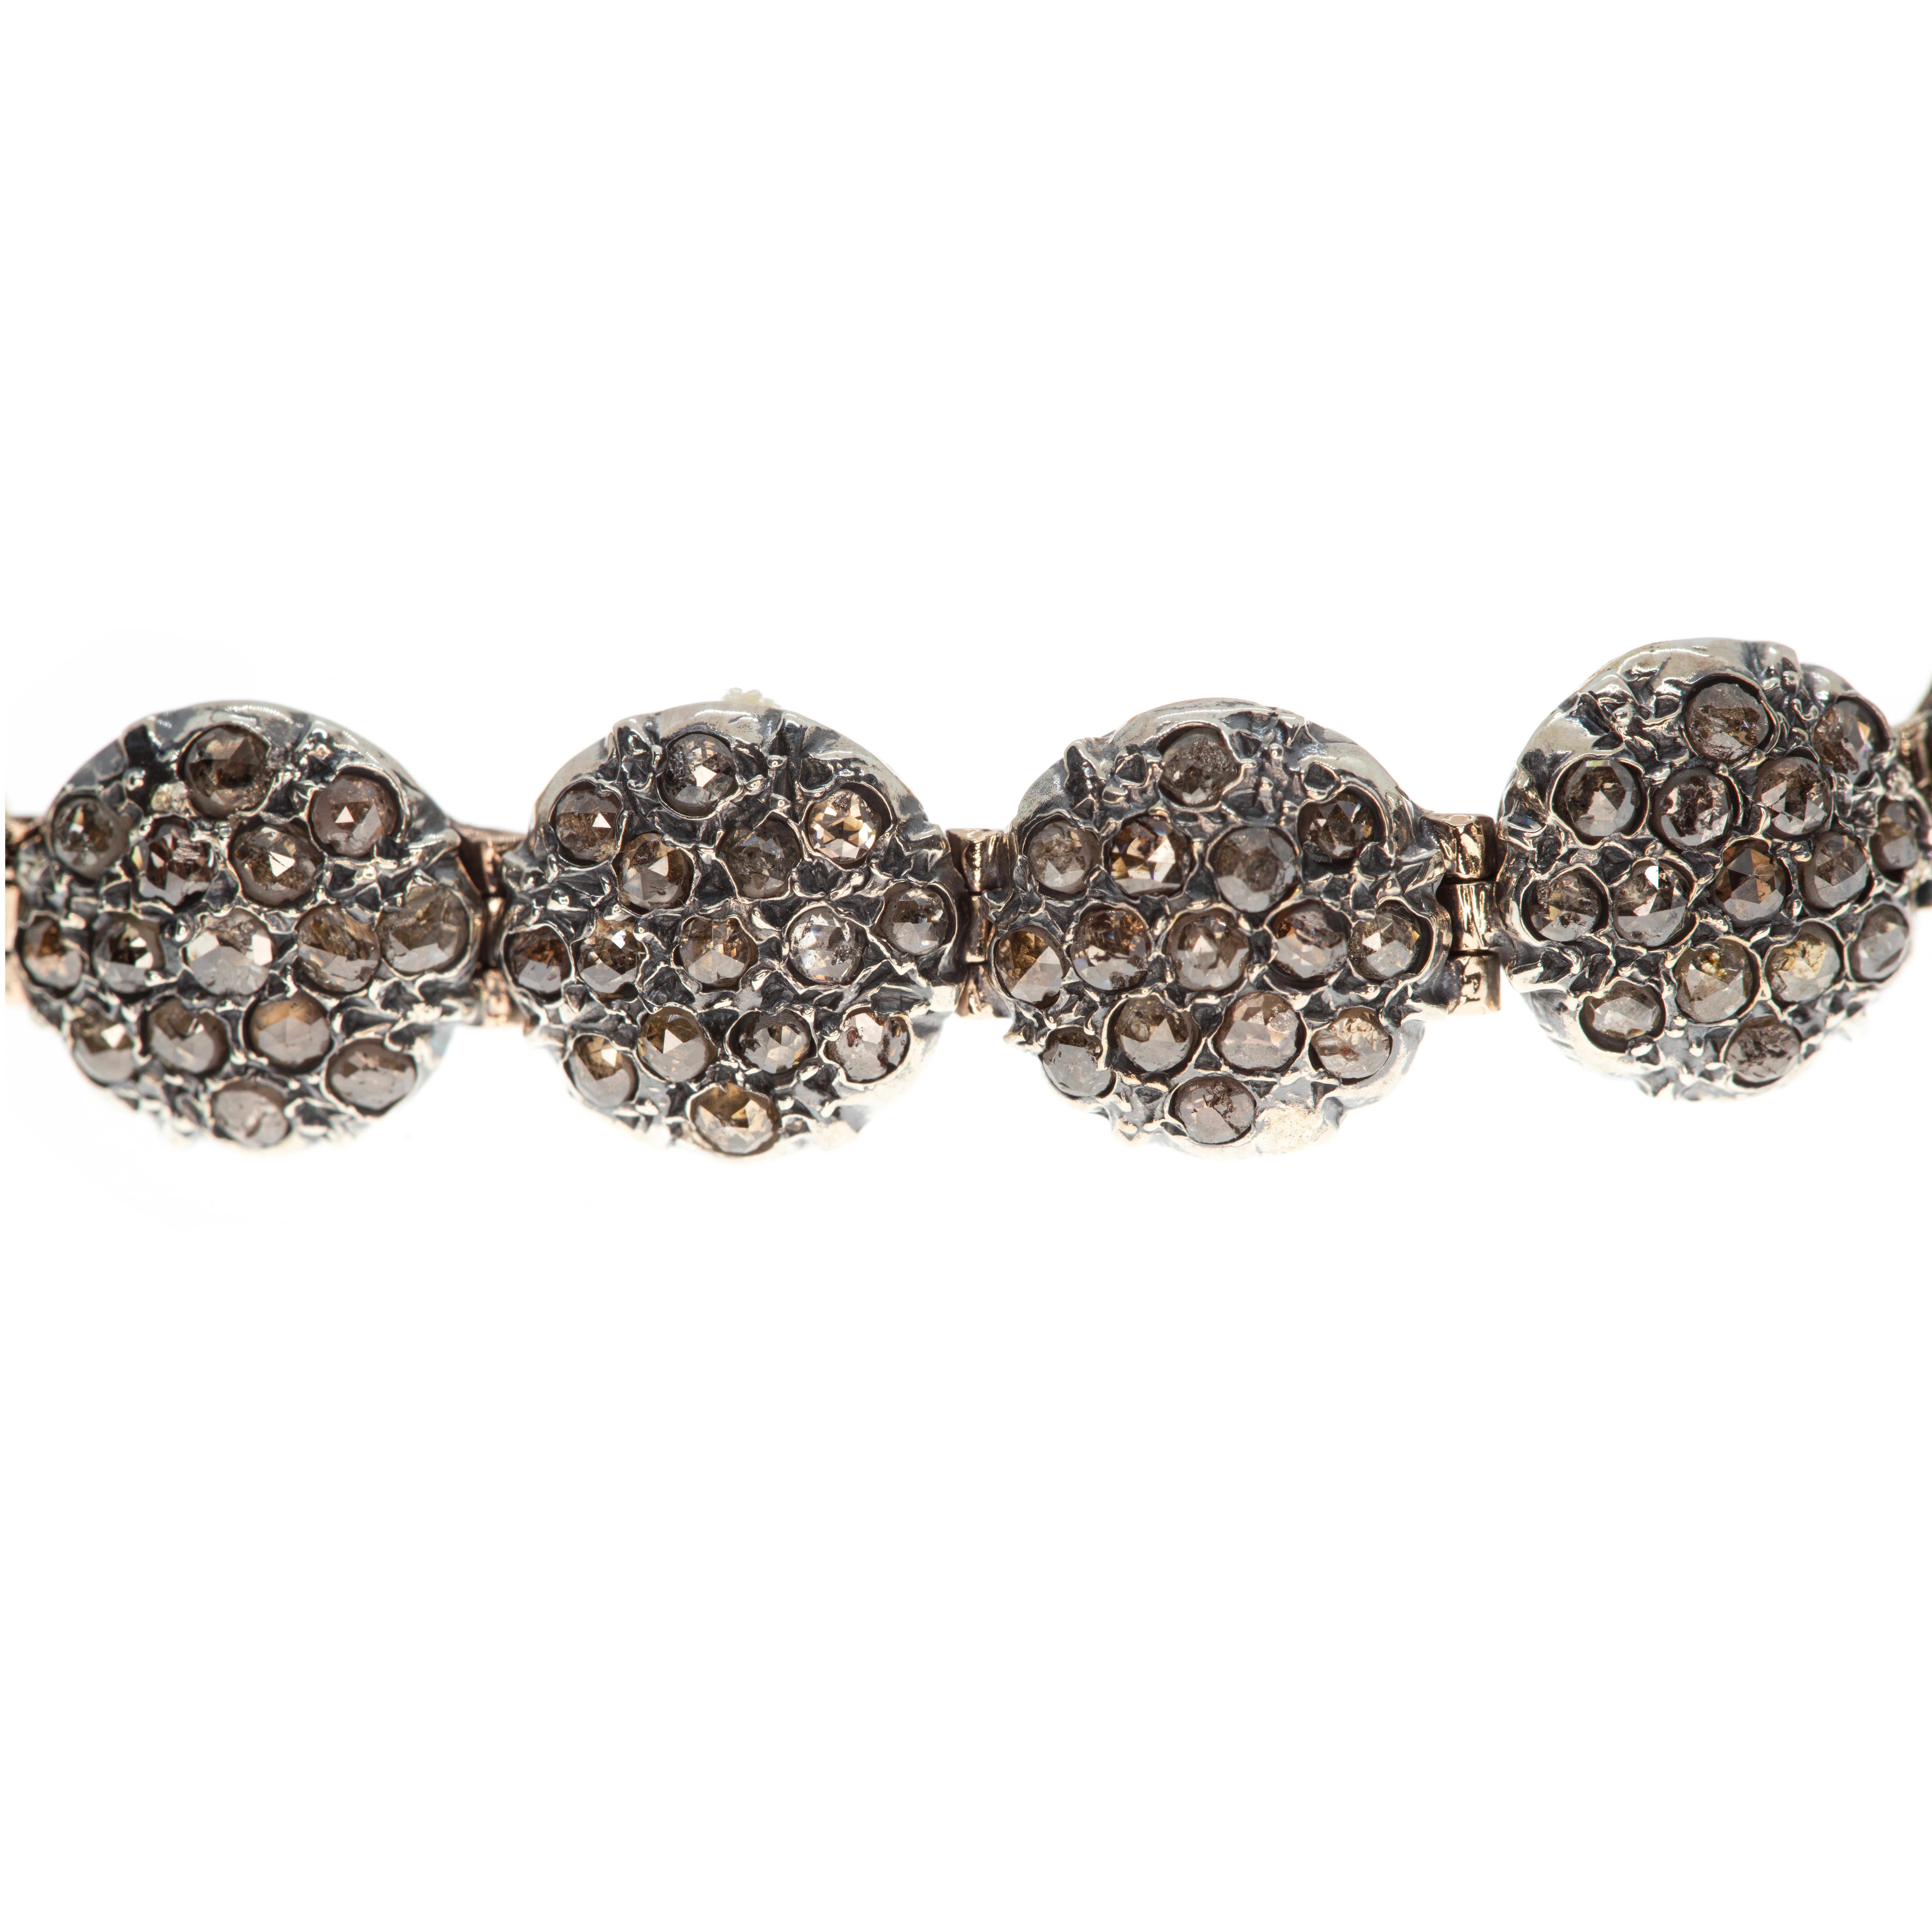 Understated and elegant, and yet 600-odd years in the making, this rose gold and silver tennis bracelet is produced using an ancient Albanian technique that was brought to Palermo in the fifteenth century. 

The tennis is made of 9-carats rose gold